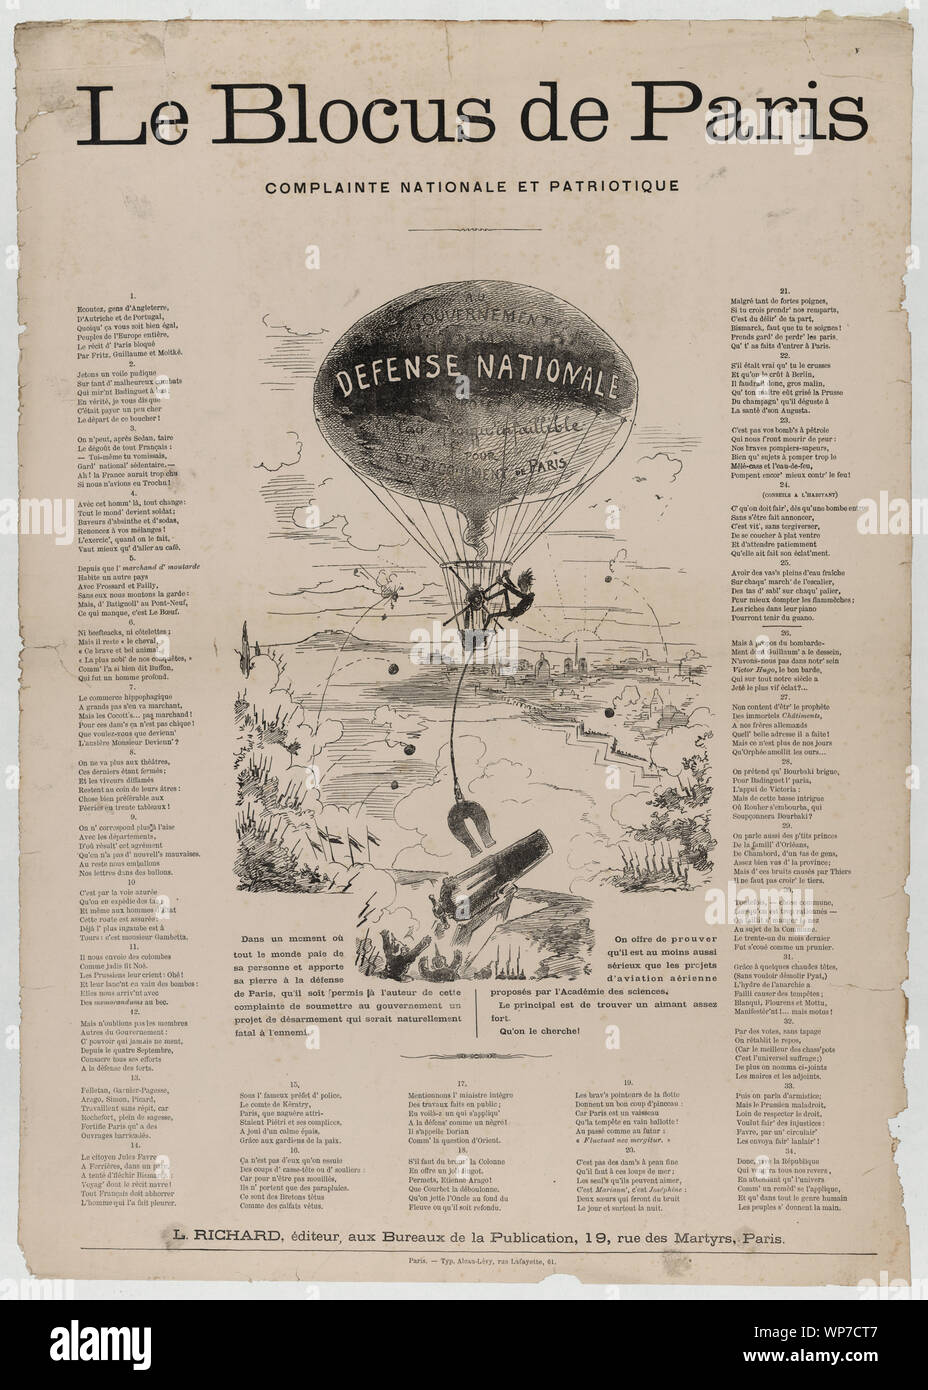 Le  blocus de Paris; Broadside shows a manned balloon labelled Au Governement de la defense nationale, projet en l'air infaillible pour bloquement de Paris with a magnet near the enemy's cannon. The illustrator humorously predicted that this disarmament project would be fatal to the enemy. Surrounding text invites the rest of Europe to listen to what happened to Parisians during the blockade: hunger, lack of theater, letters delivered by balloon. Ends with the upbeat vive la République.; Stock Photo